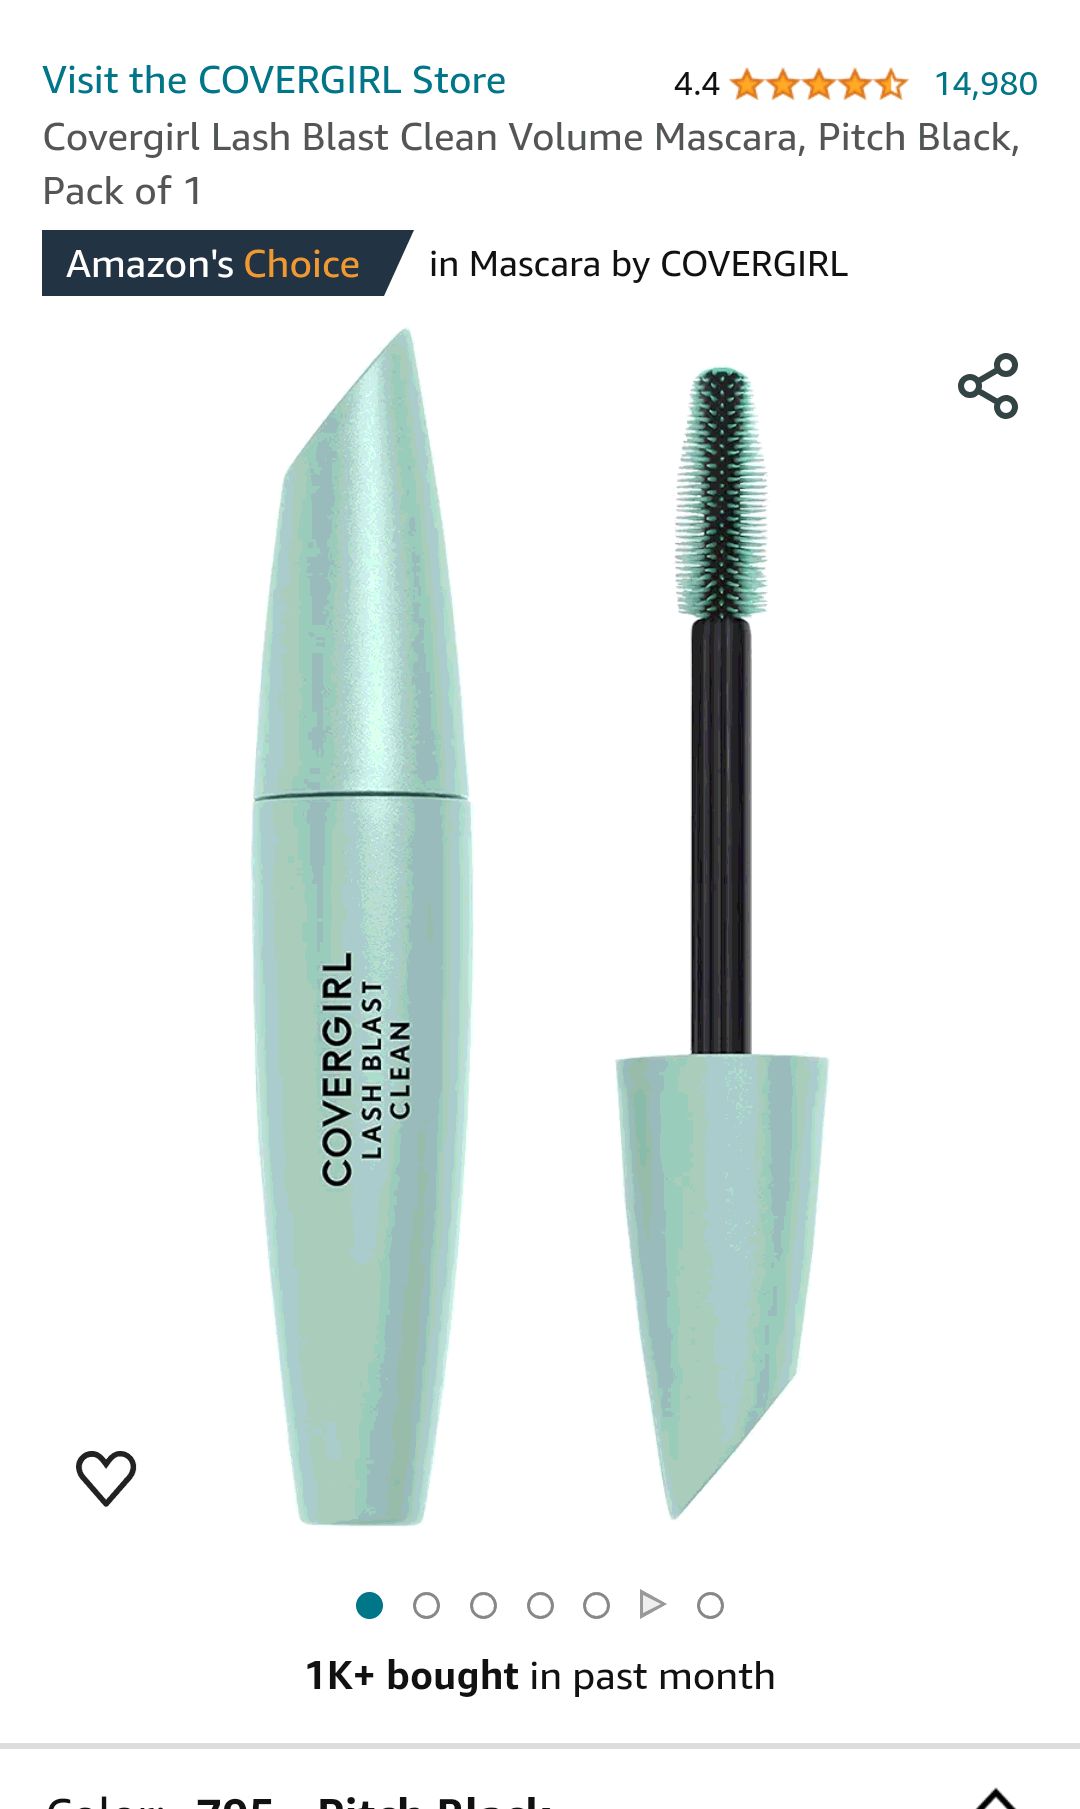 Amazon.com : Covergirl Lash Blast Clean Volume Mascara, Pitch Black, Pack of 1 : Beauty & Personal Care